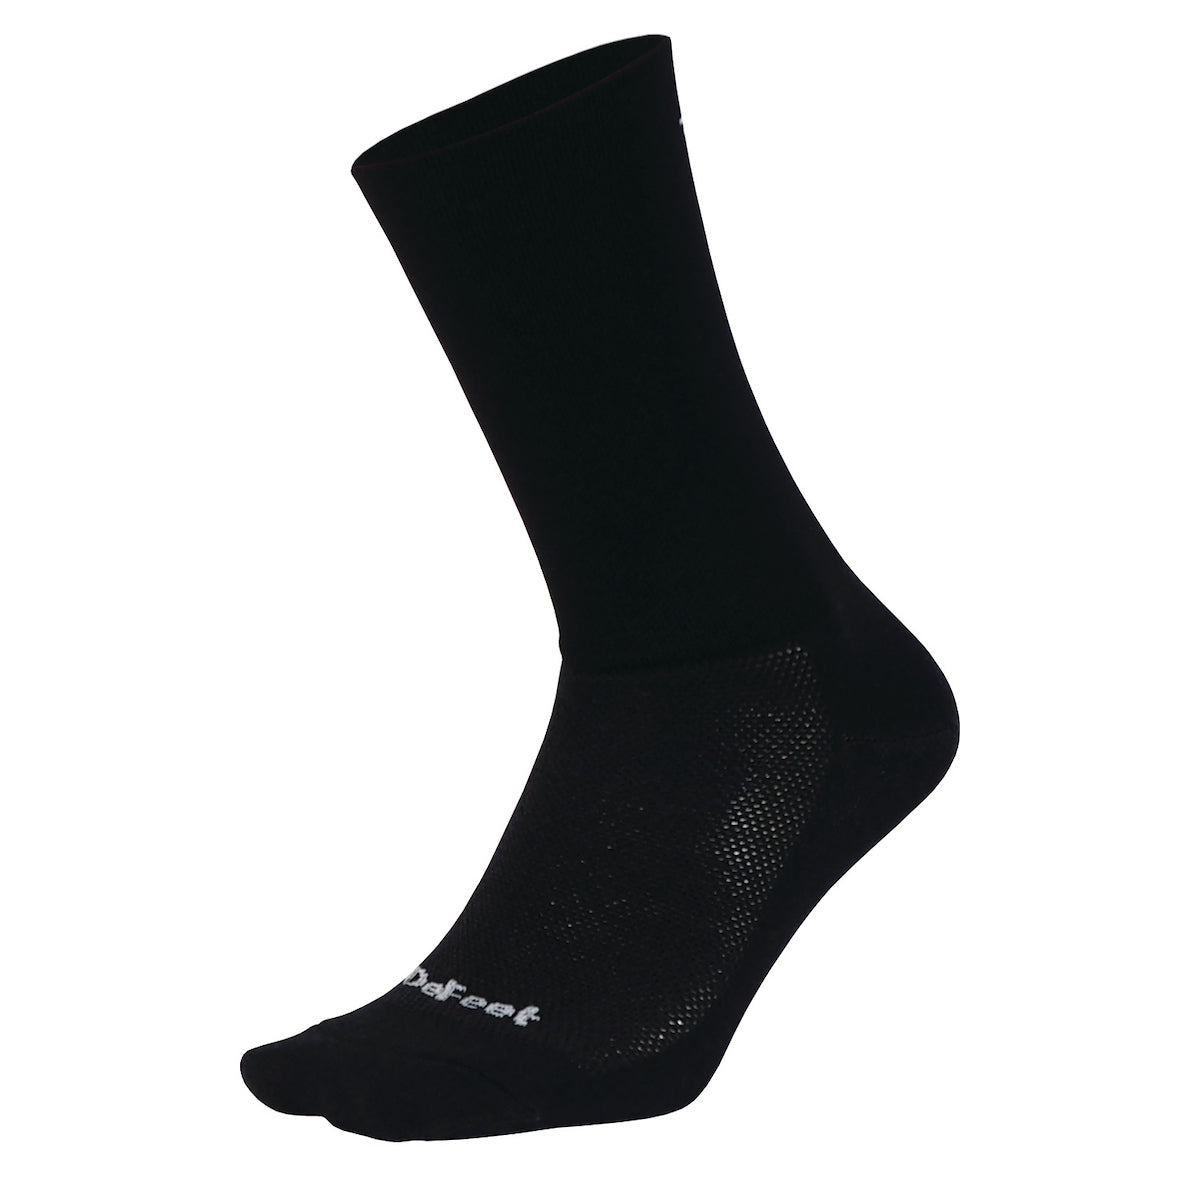 DeFeet Aireator 6" D-Logo cycling sock with 6" double cuff in black